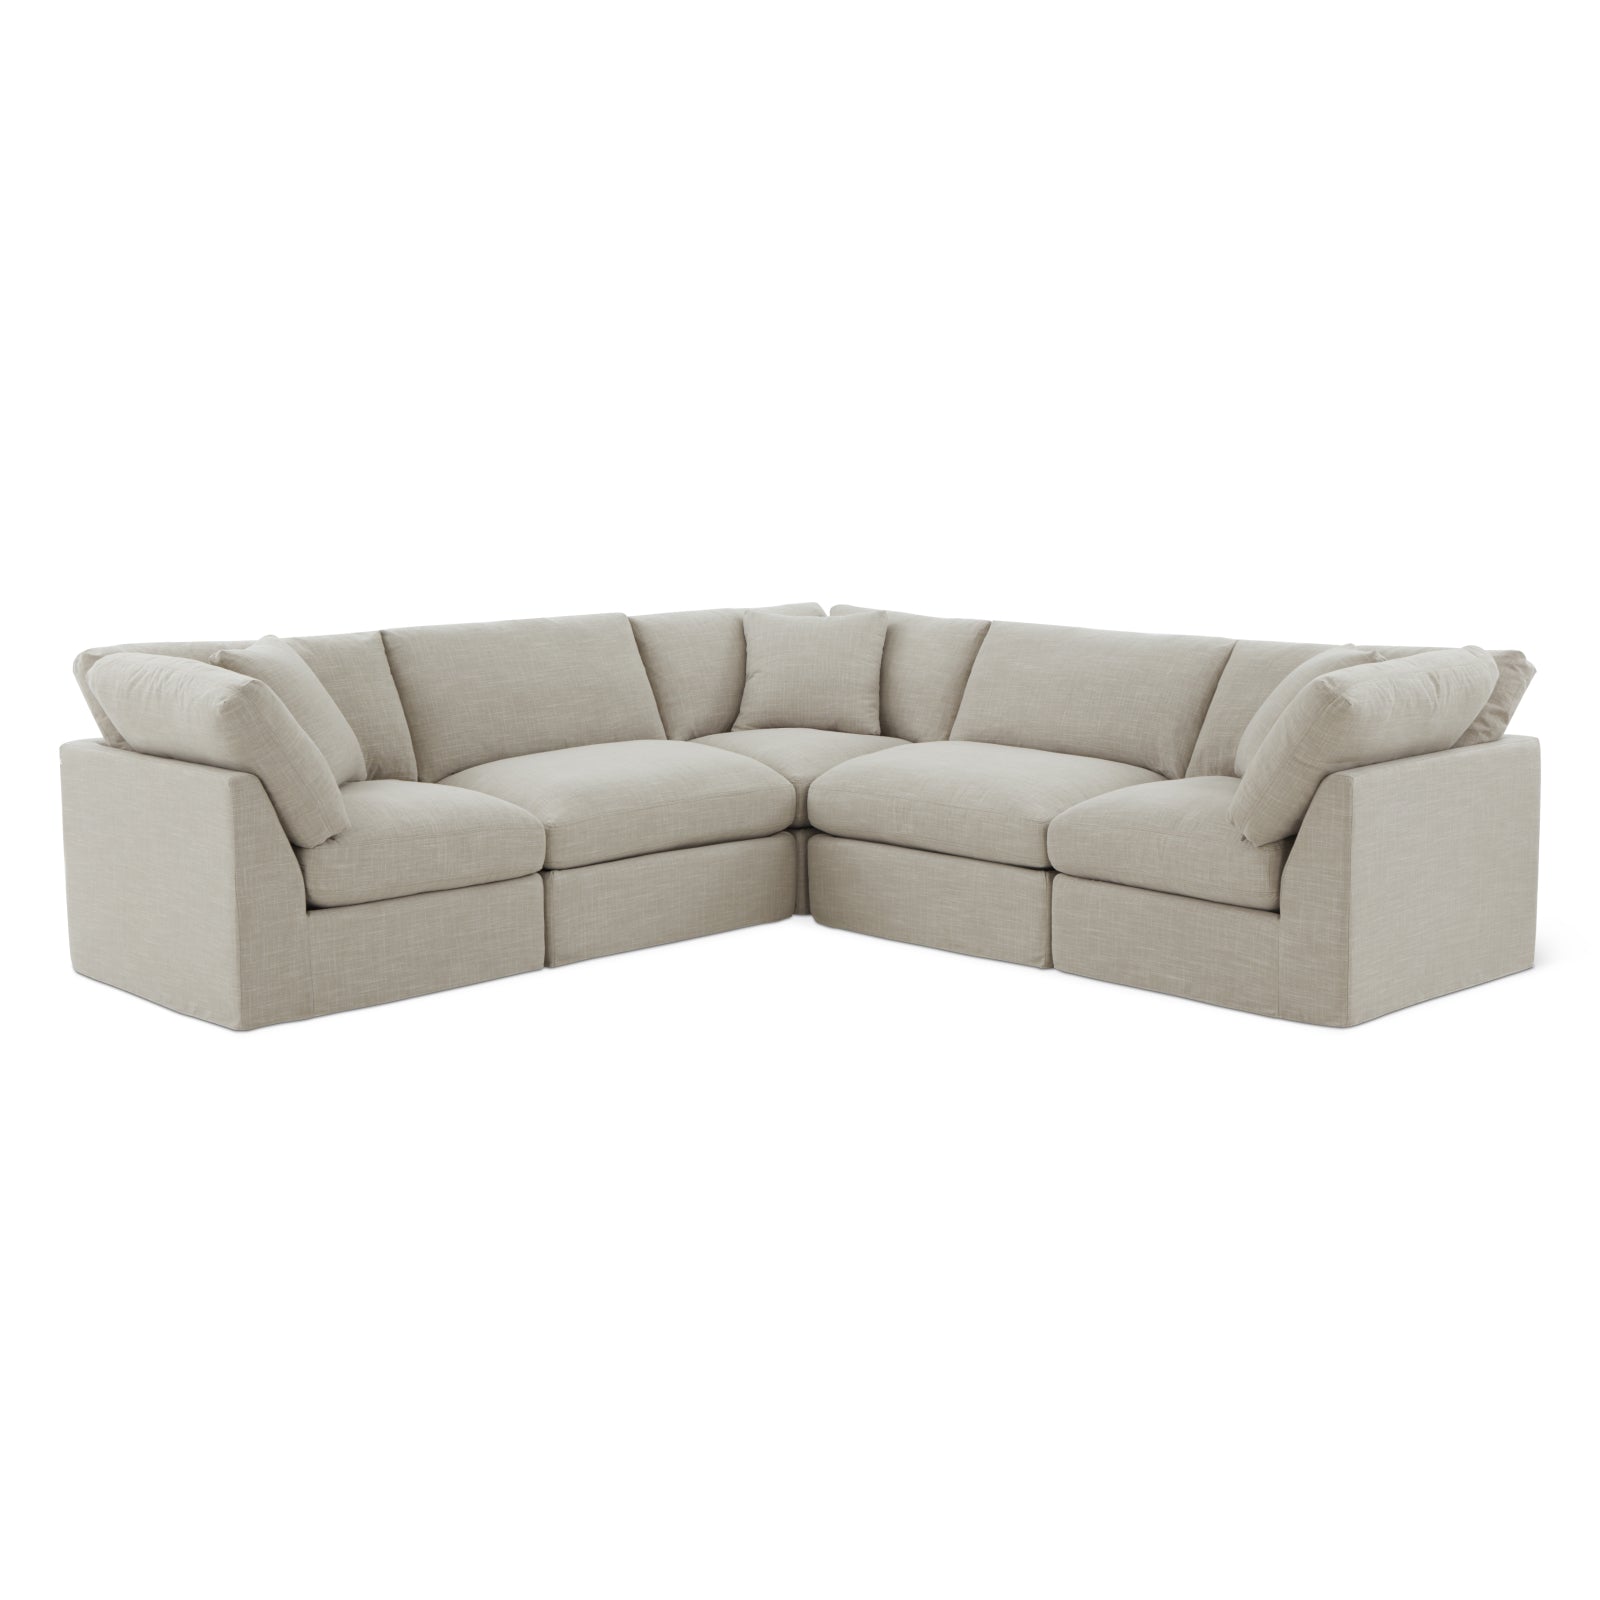 Get Together™ 5-Piece Modular Sectional Closed, Standard, Light Pebble - Image 11